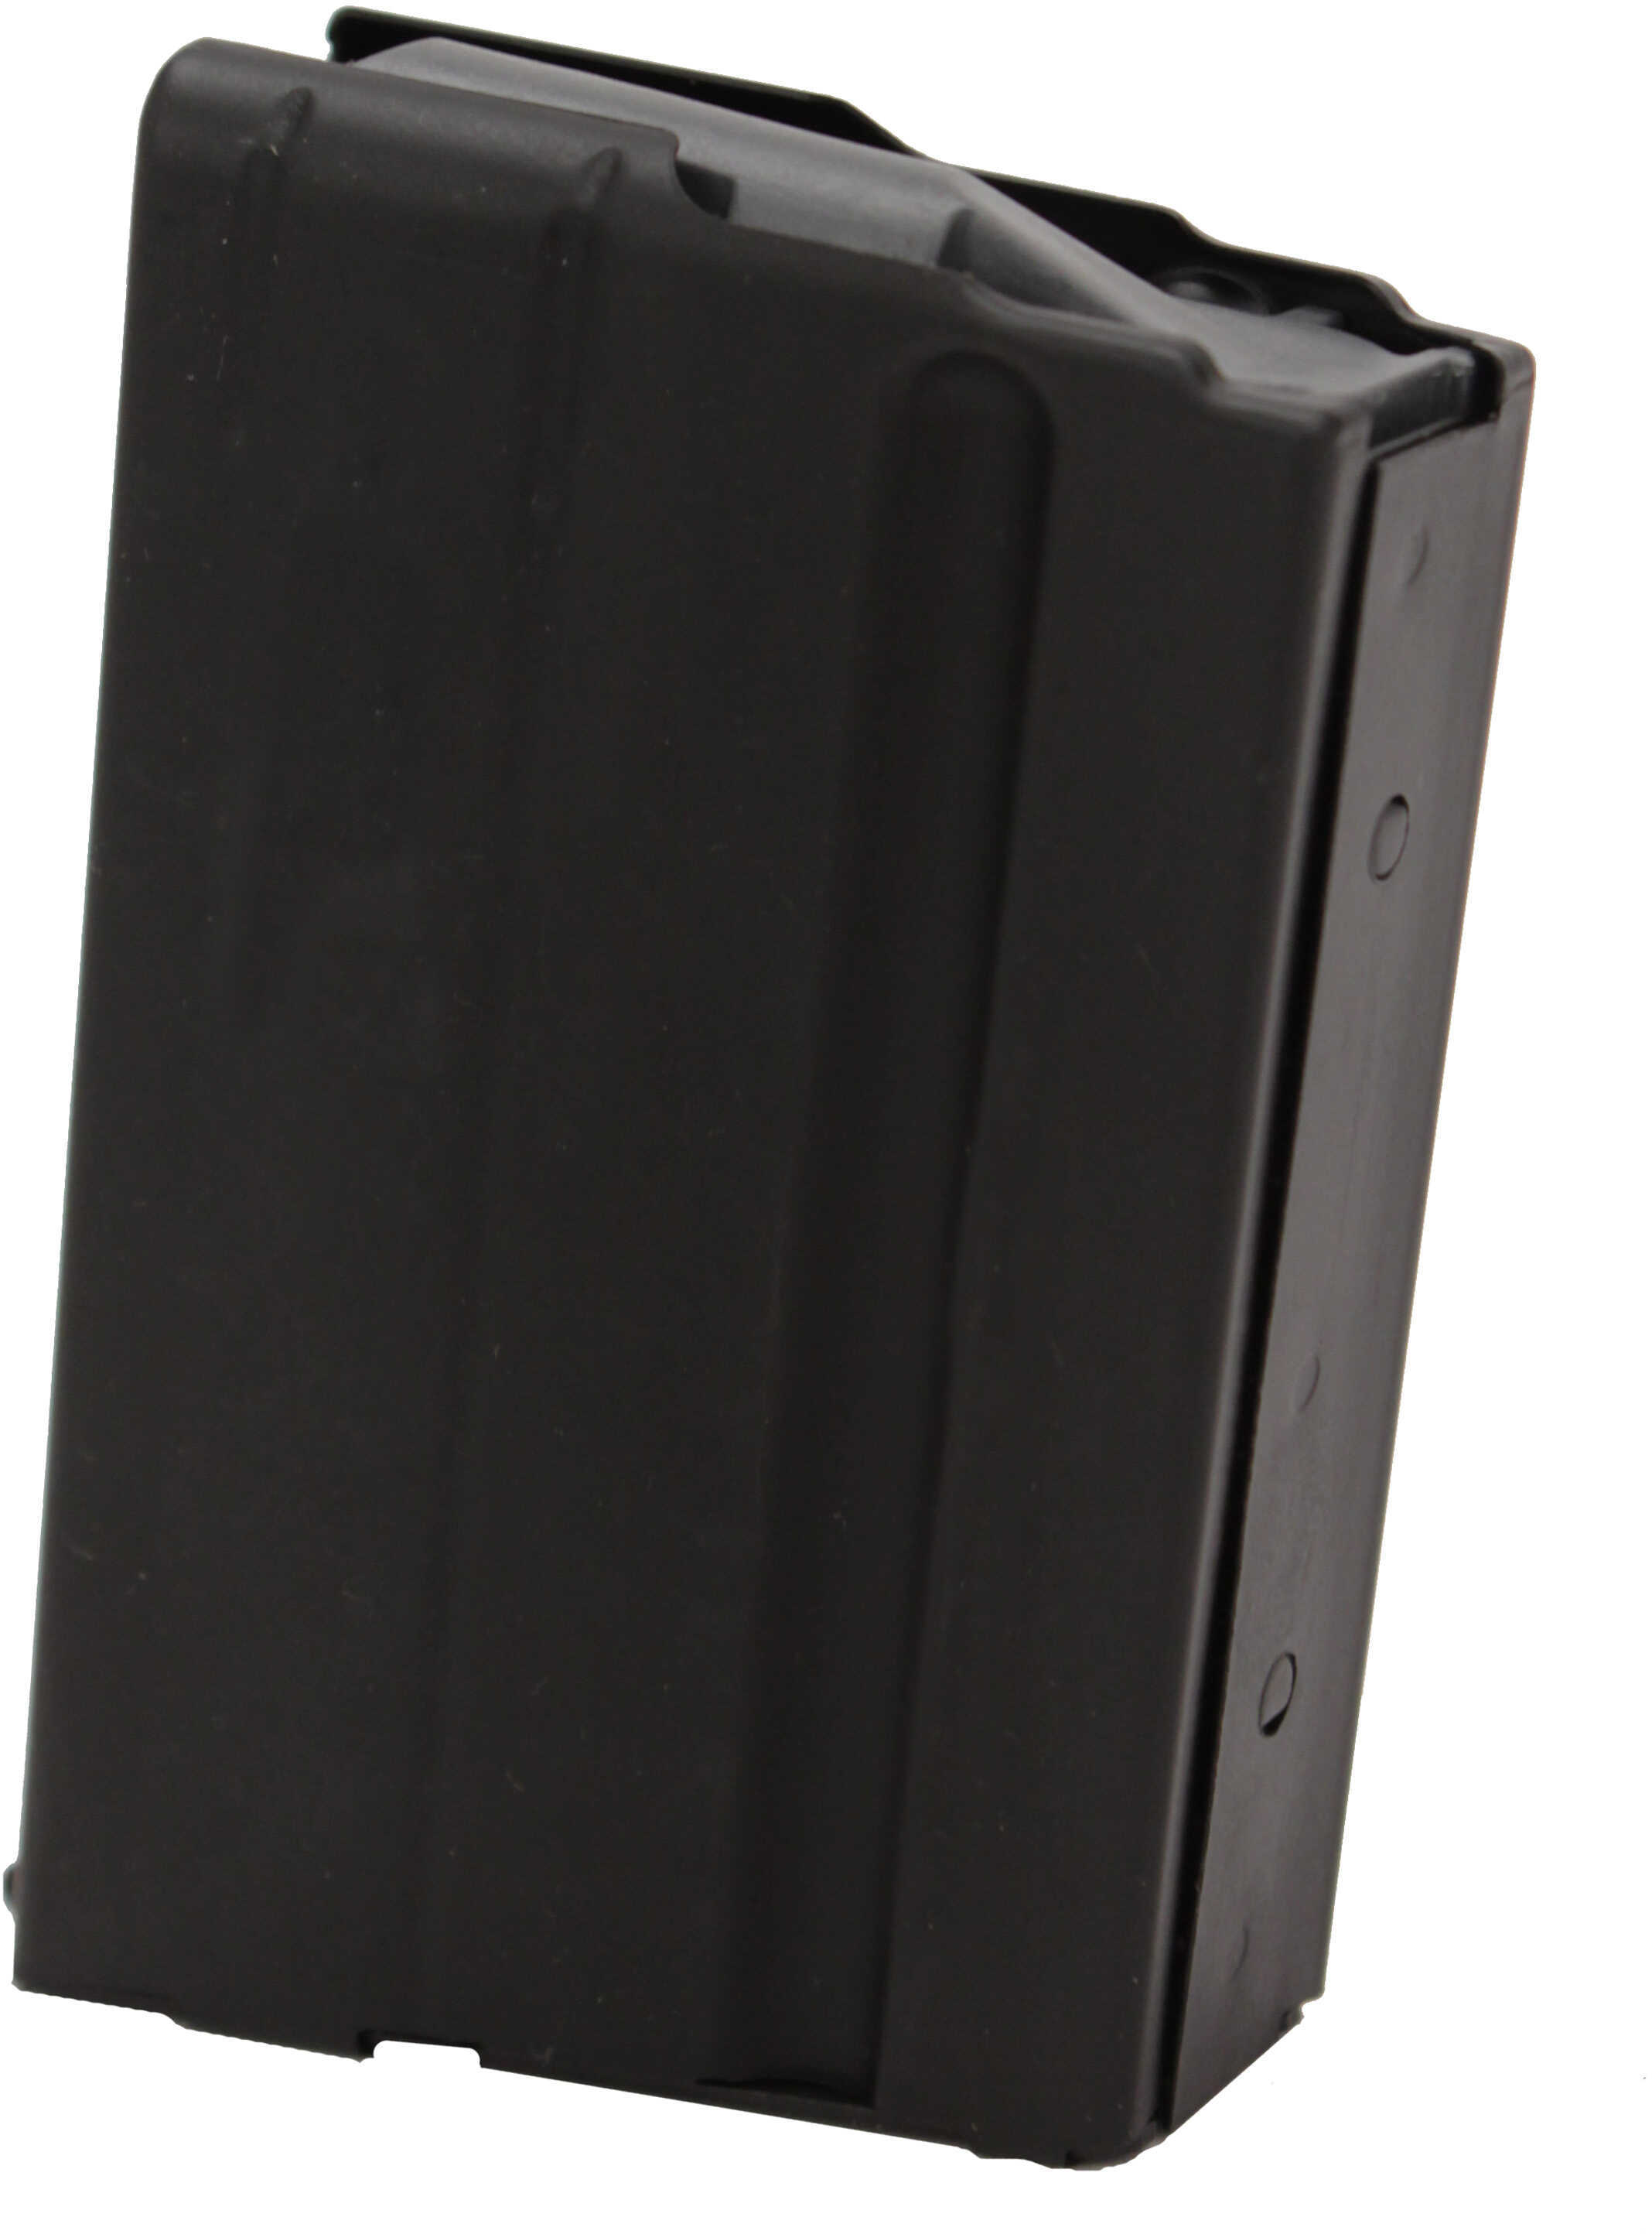 C Products Defense Inc 1068041177CP AR-15 Replacement Magazine 6.8 SPC/224 Valkyrie Round Stainless Steel Blac